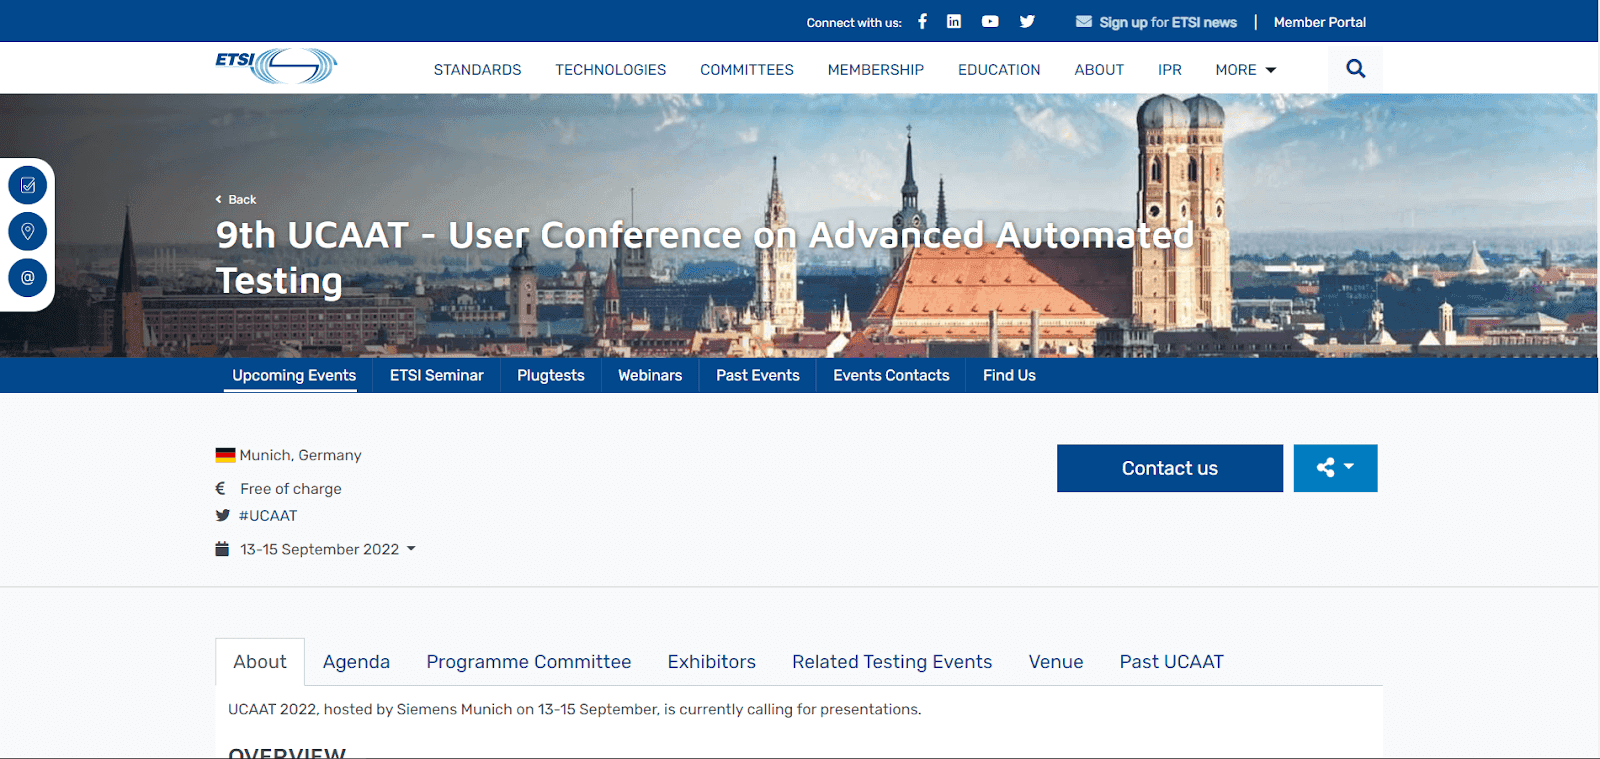 9th UCAAT - User Conference on Advanced Automated Testing